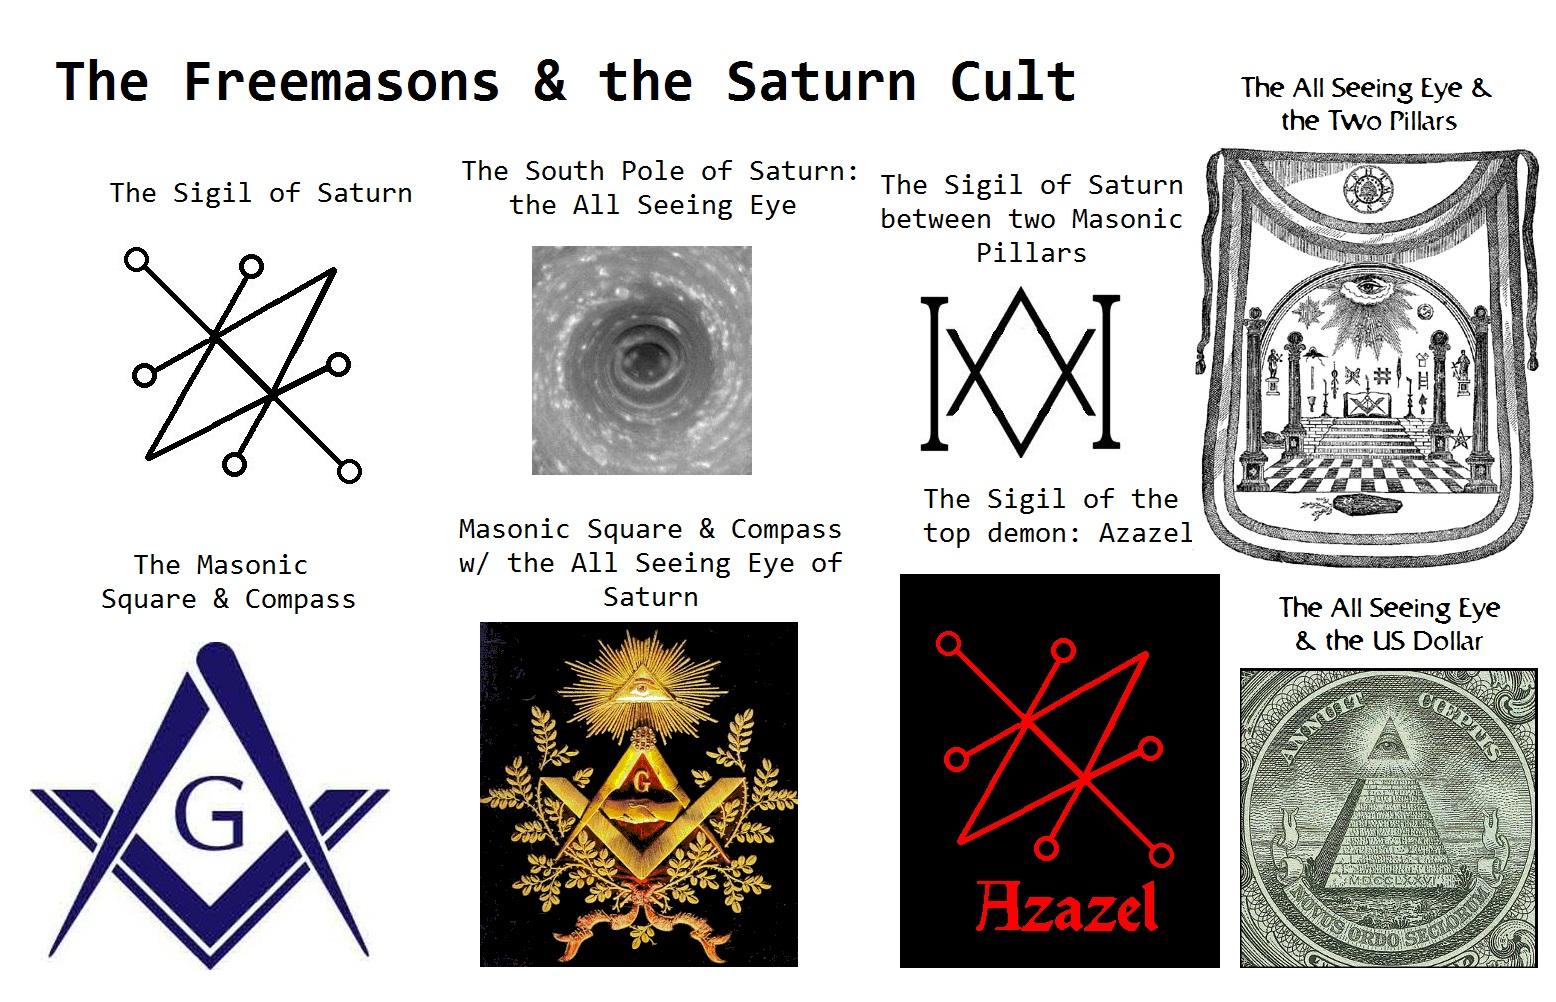 3) the freemasons and the saturn cult